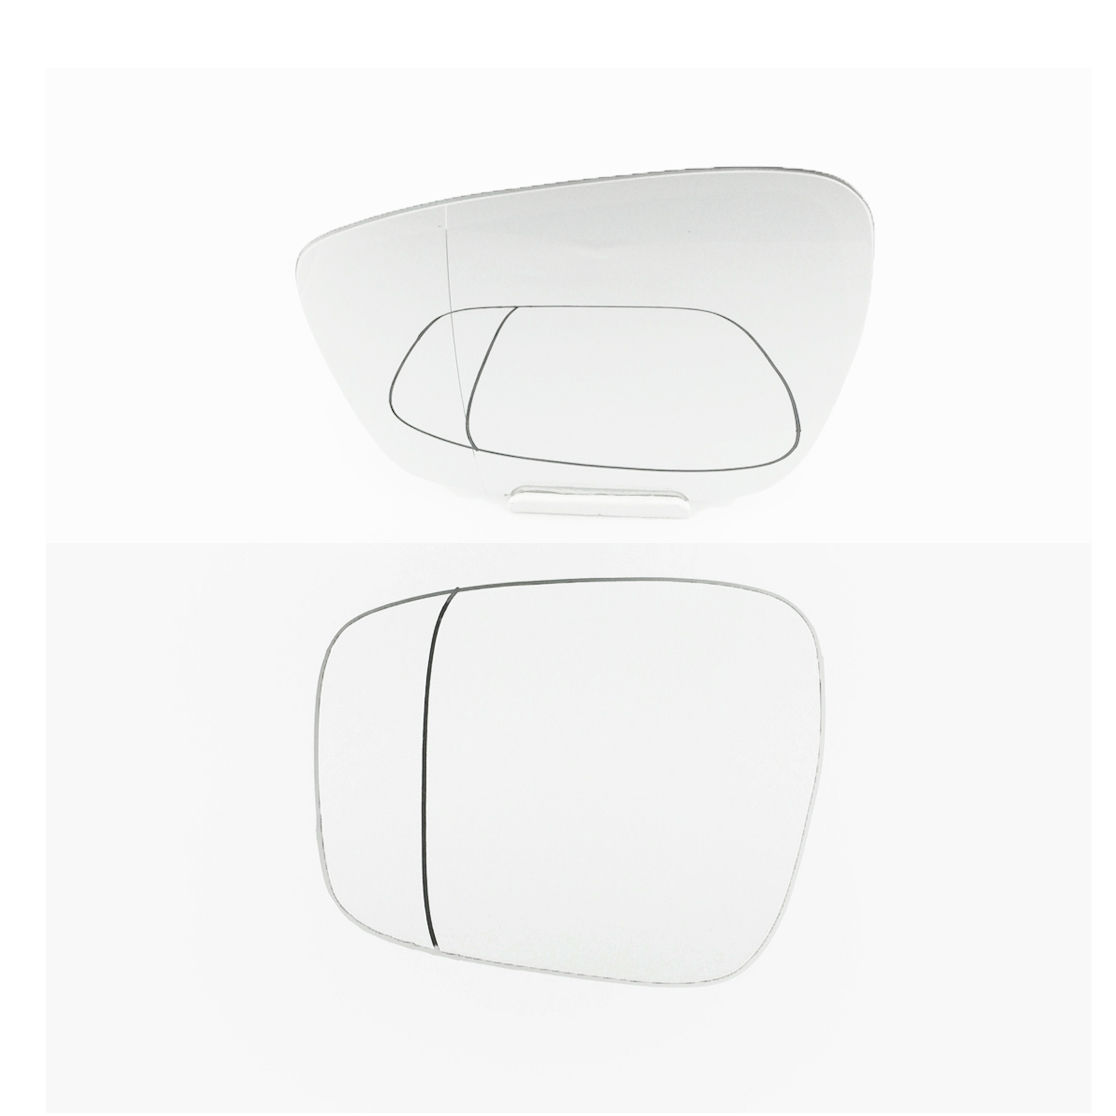 Peugeot 308 Wing Mirror Glass RIGHT HAND ( UK Driver Side ) 2014 to 2020 – Convex Wing Mirror